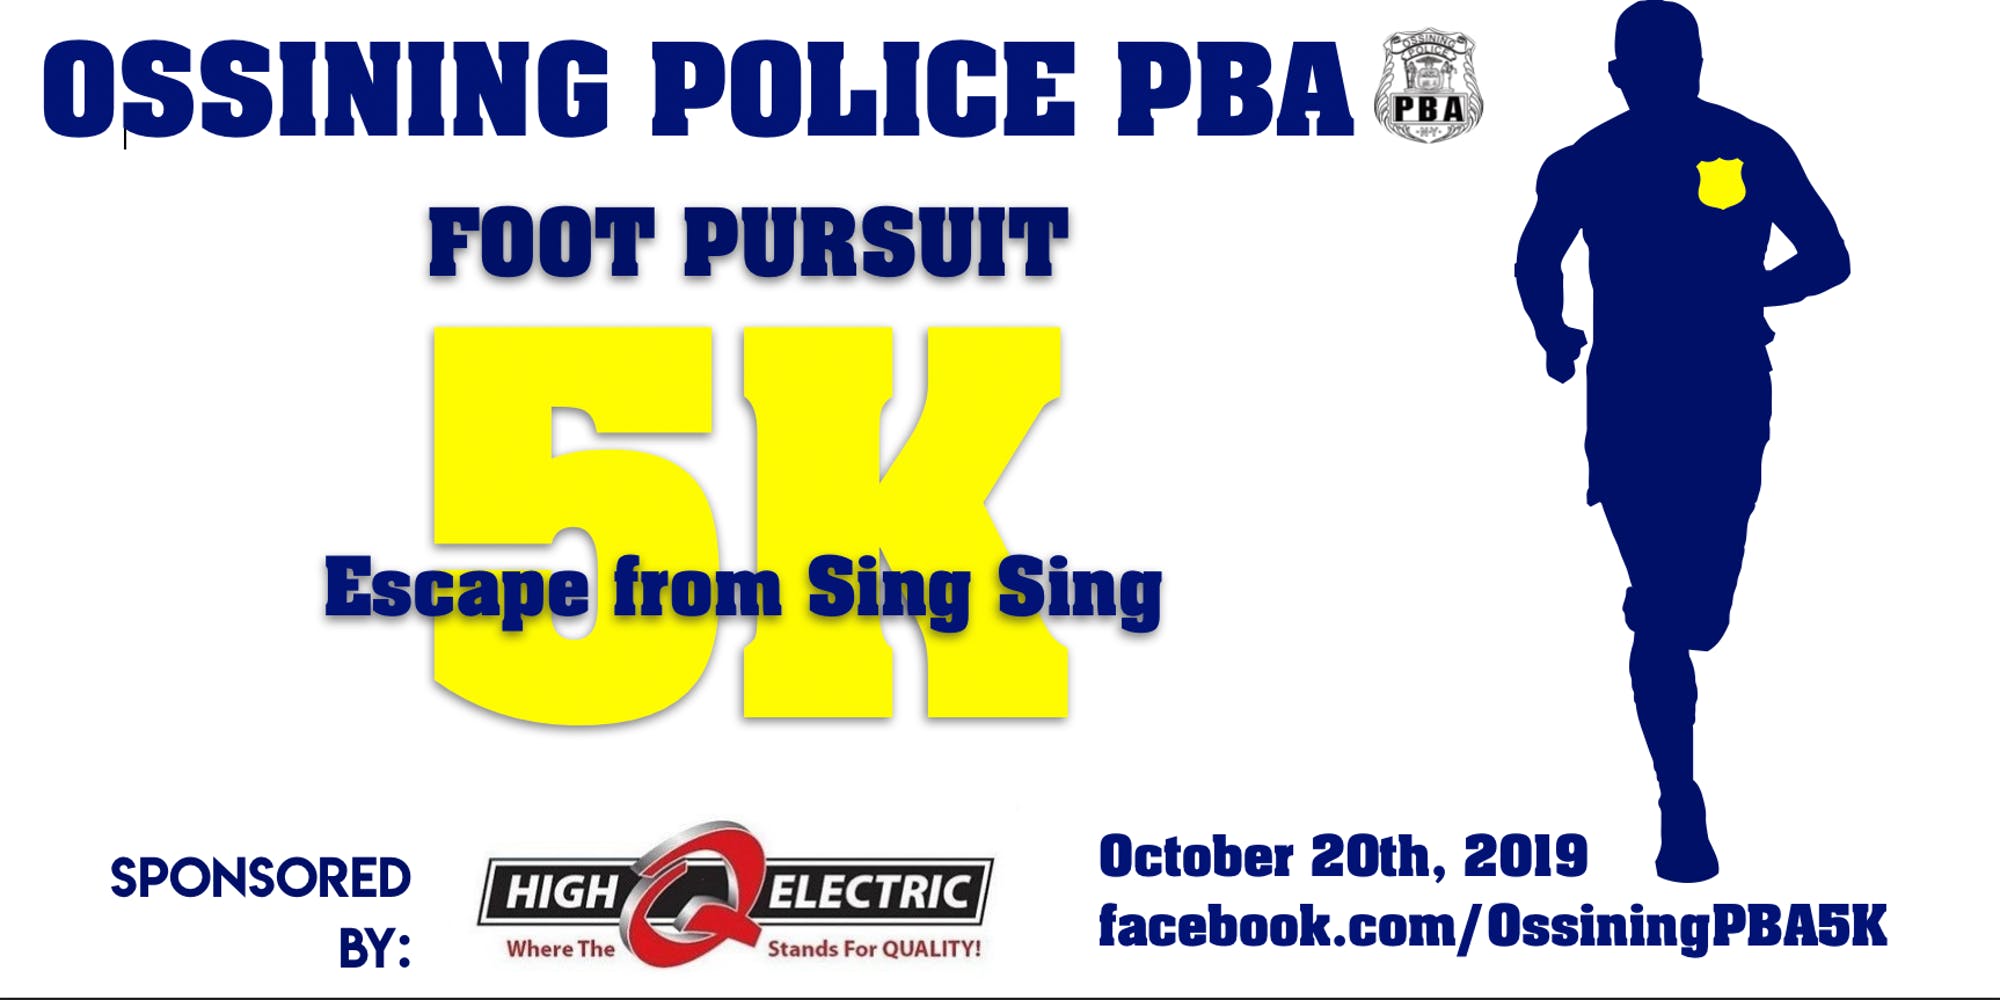 Ossining PBA Foot Pursuit 5K: Escape from Sing Sing